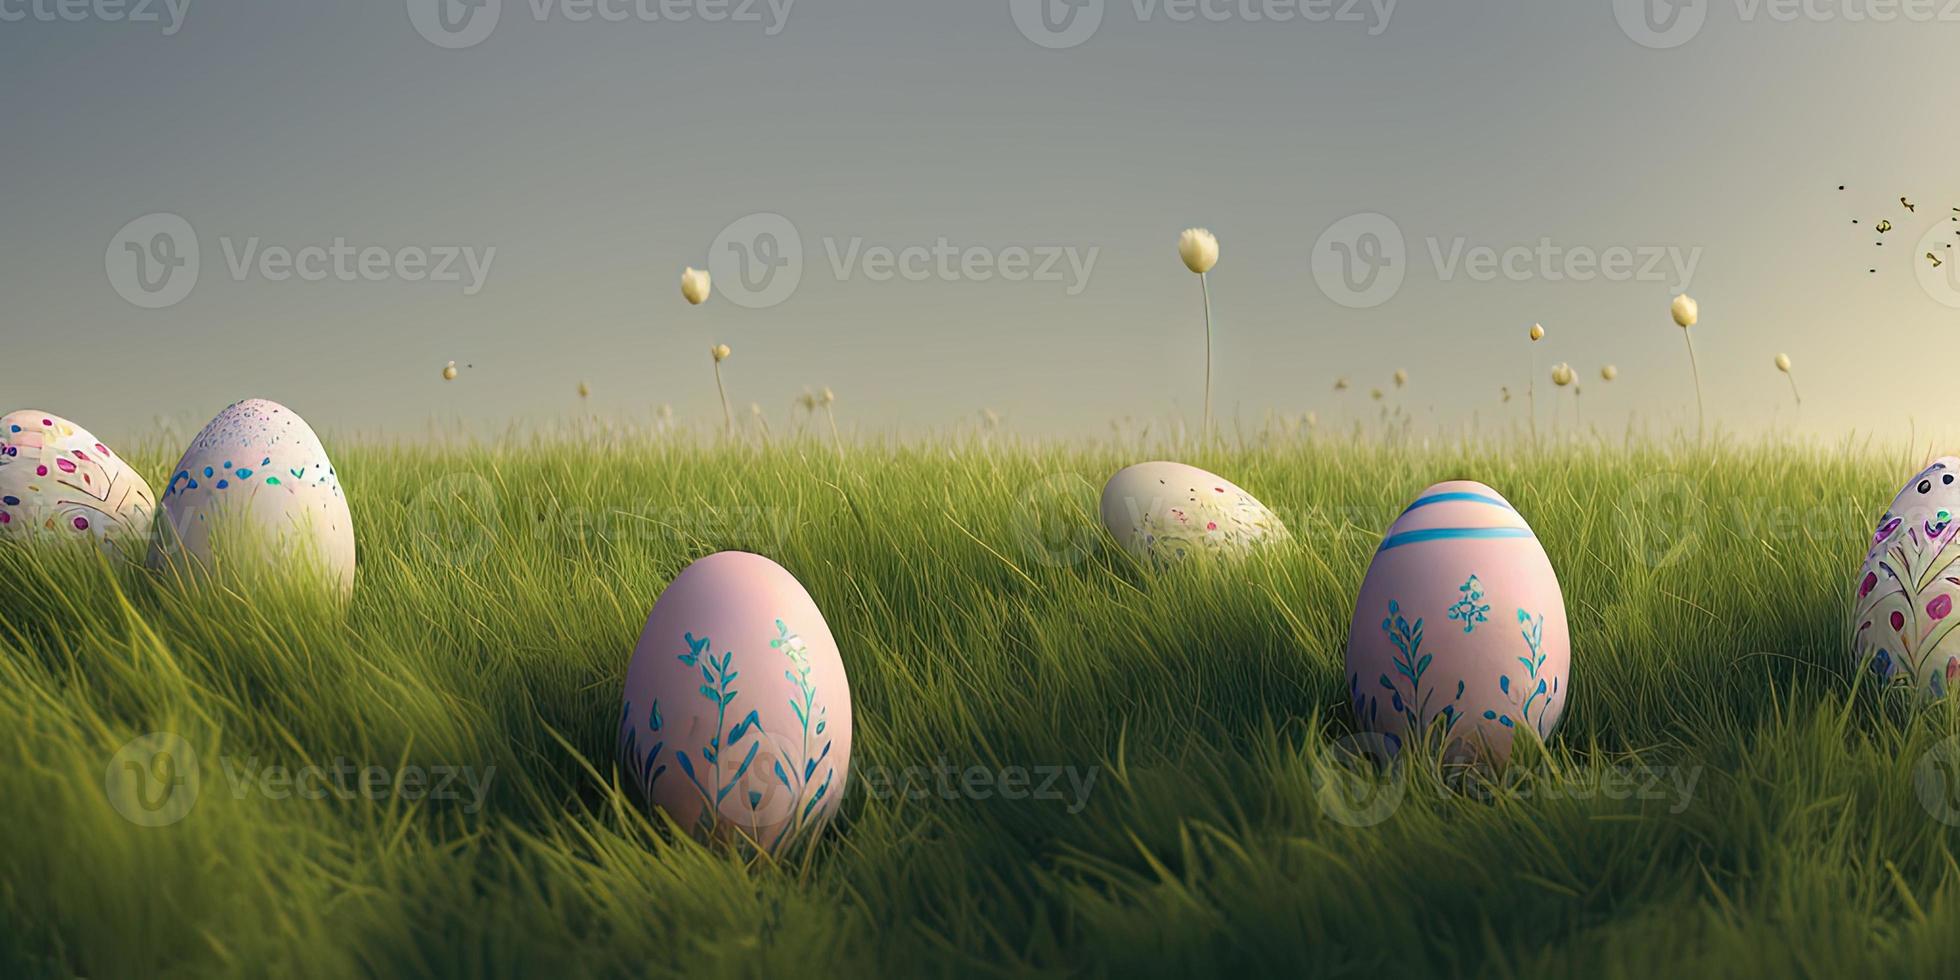 Easter background with decorated Easter eggs on a green meadow in the spring season. photo